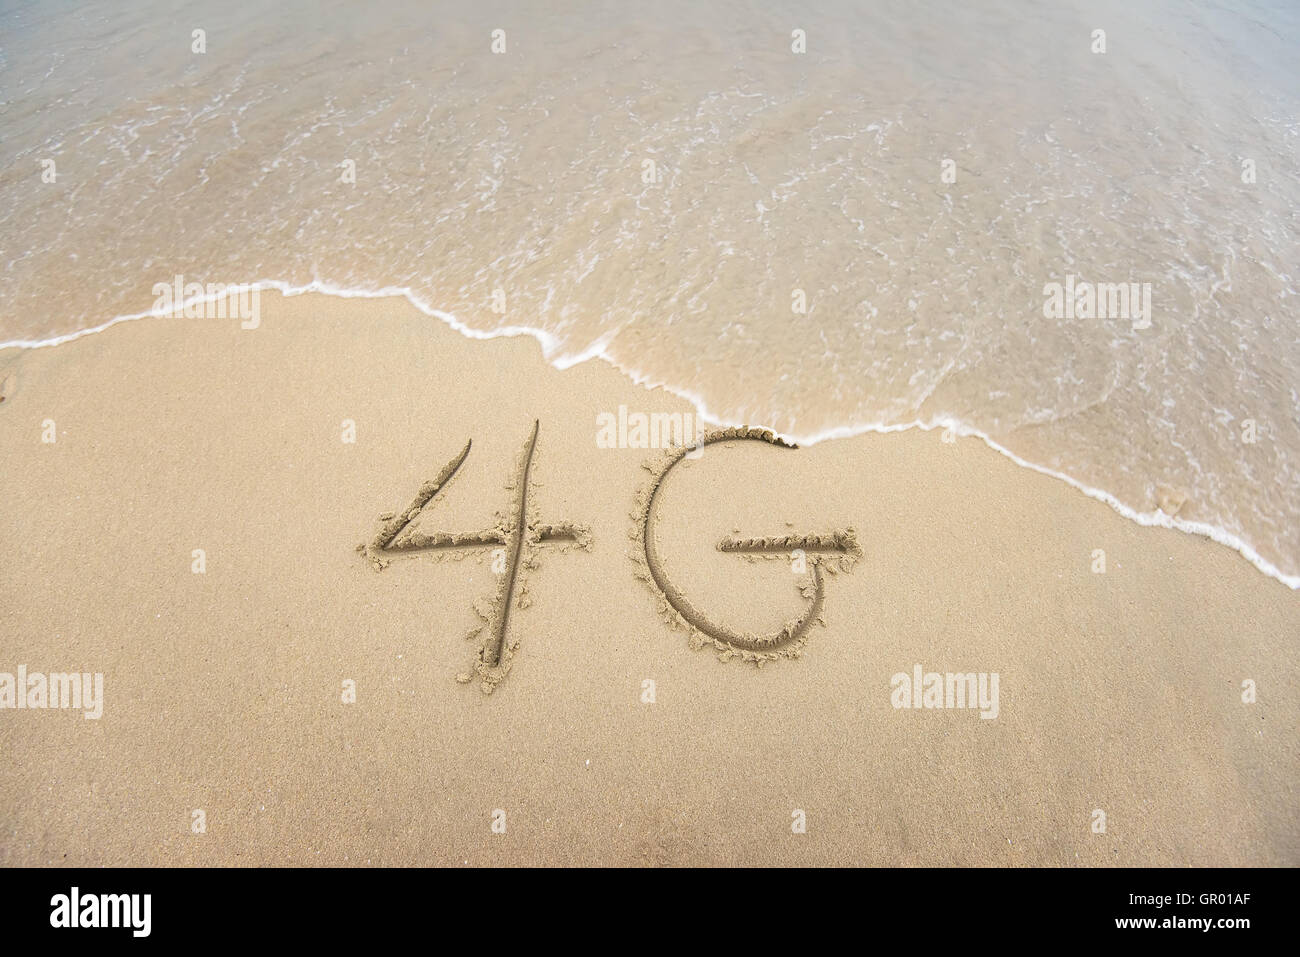 4G written in the sand Stock Photo